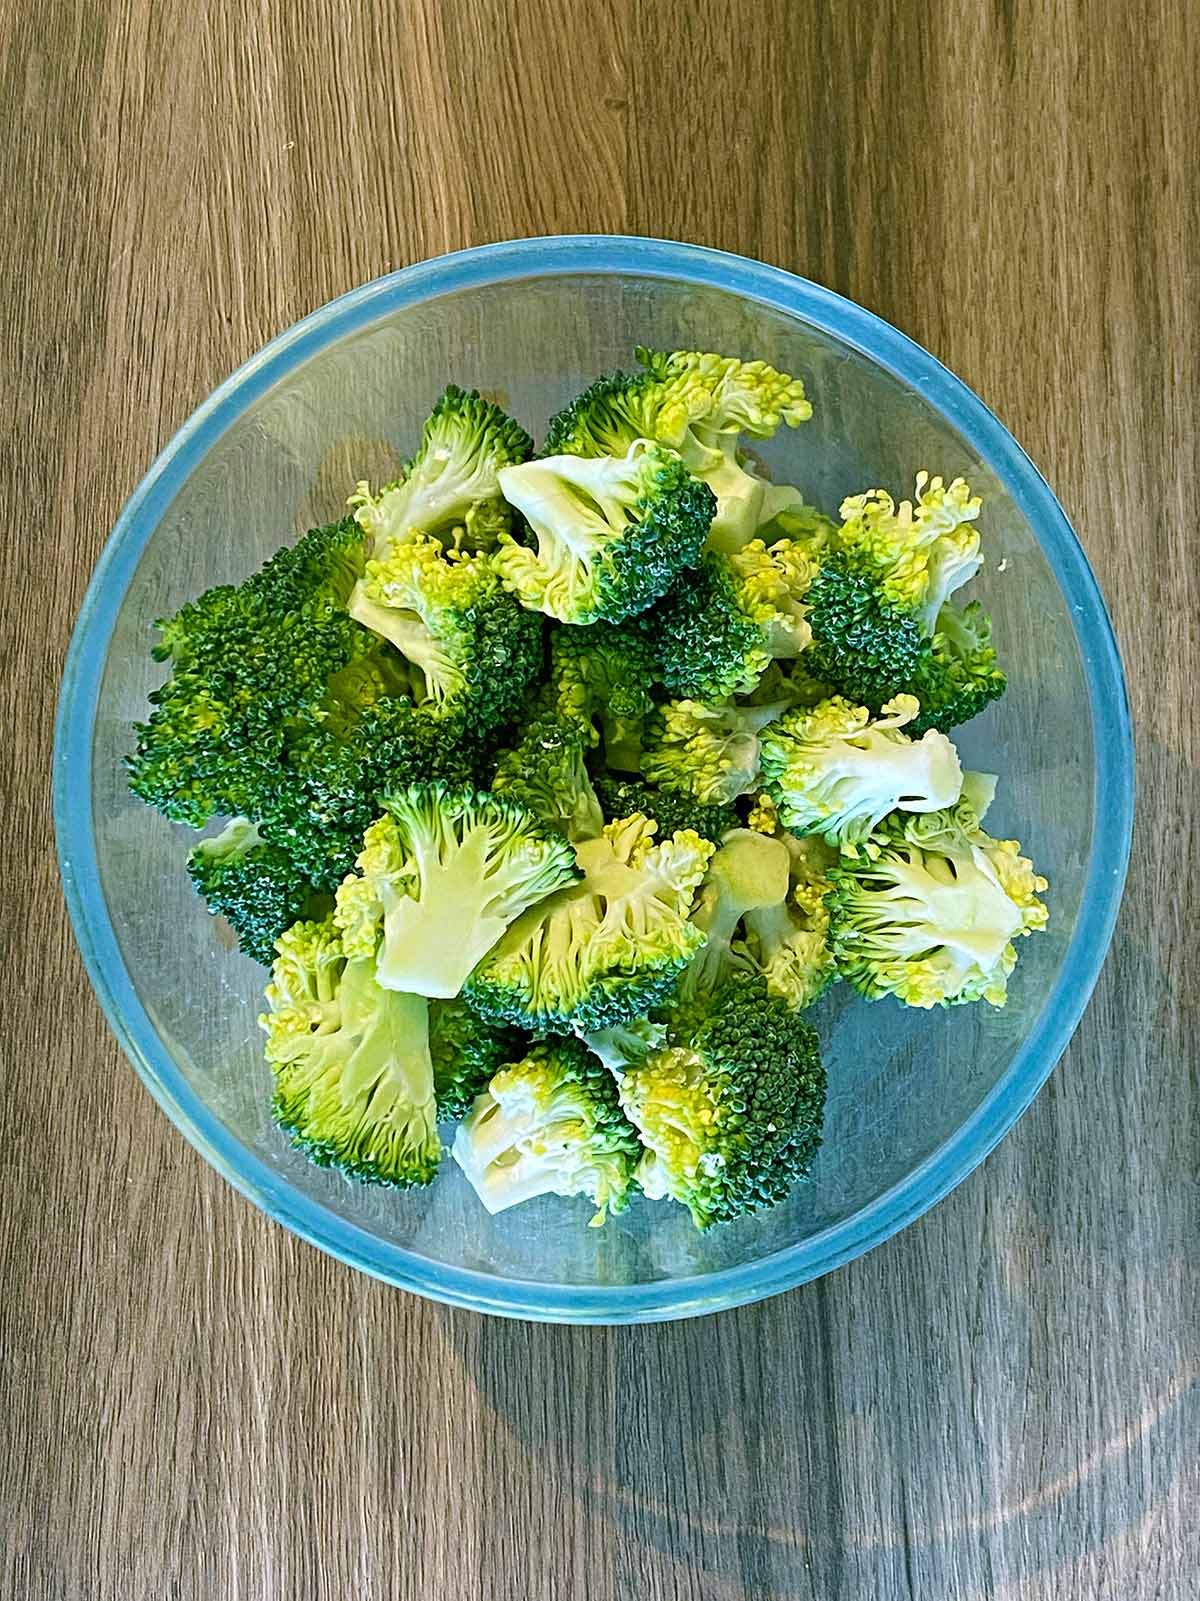 Broccoli florets in a glass bowl.